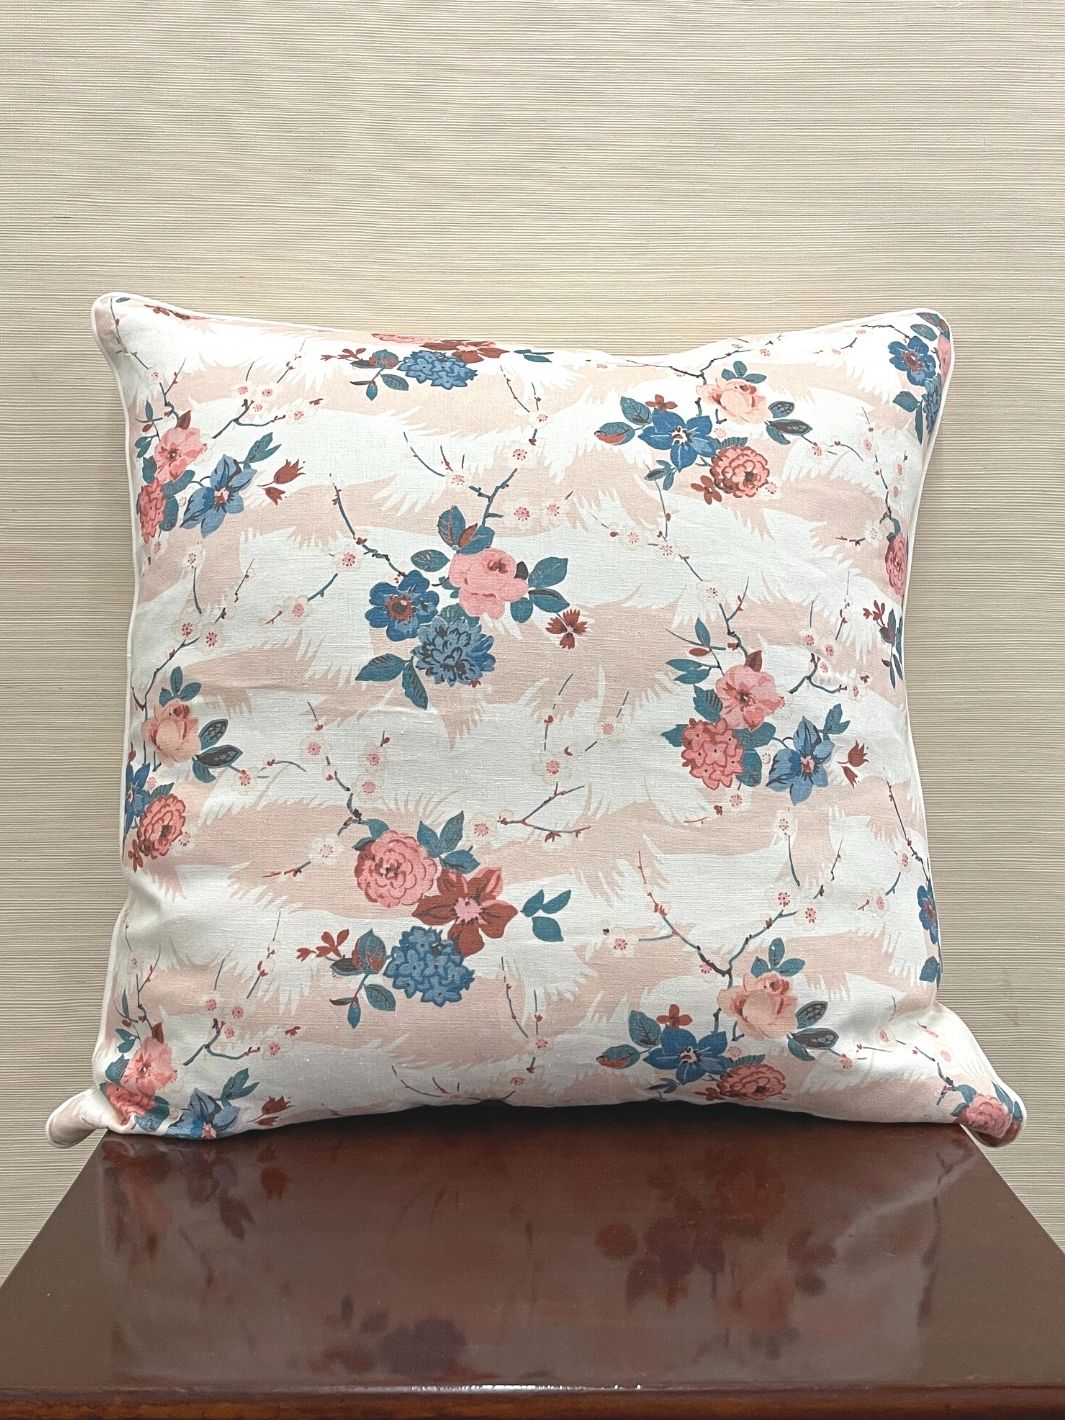 'Dora Chintz' Throw Pillow by Nathan Turner 22x22 - Pink + Blue on Hopsack